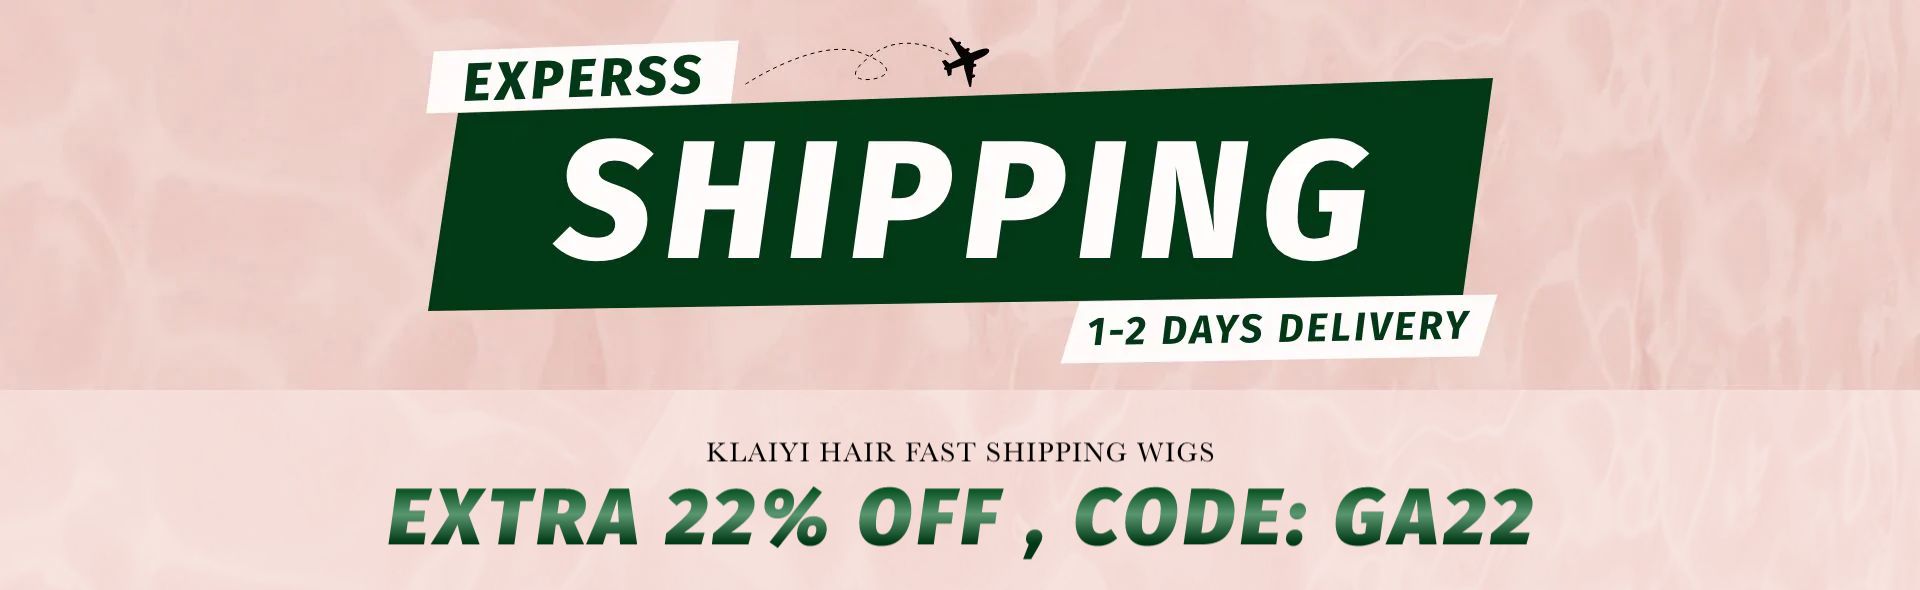 Klaiyi Overnight Shipping Wigs With Free Delivery – Page 2 – KLAIYI